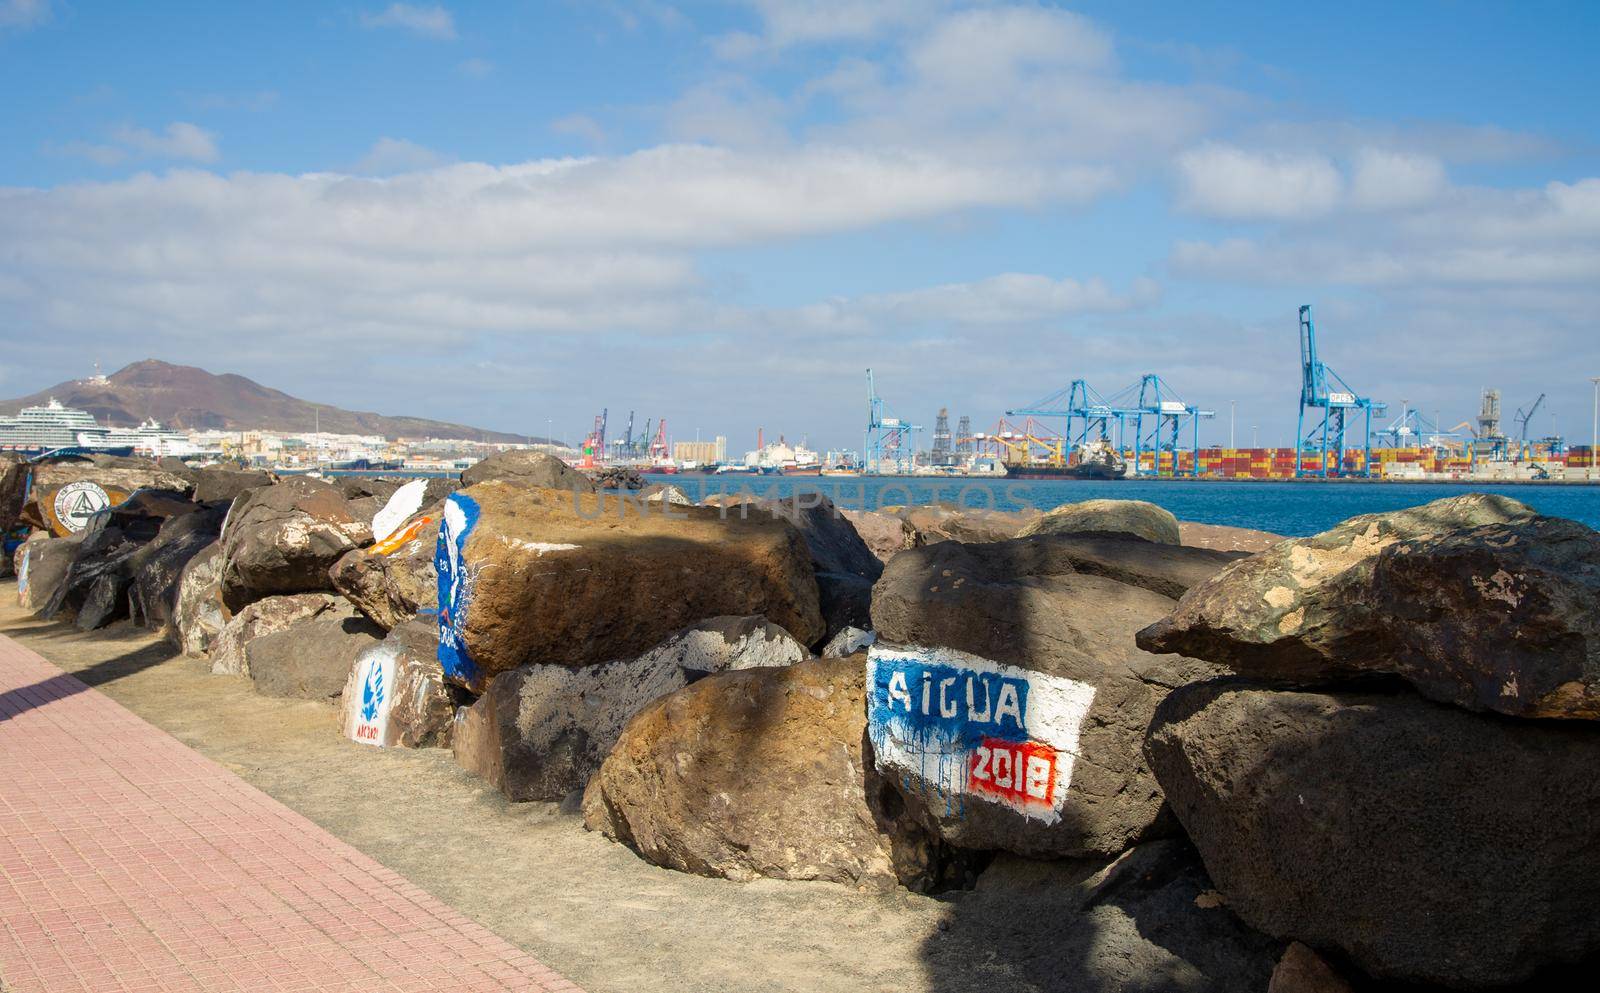 Paintings on stones in the harbour of Las Palmas de Gran Canary Spain, in the background you can see the industrial harbour